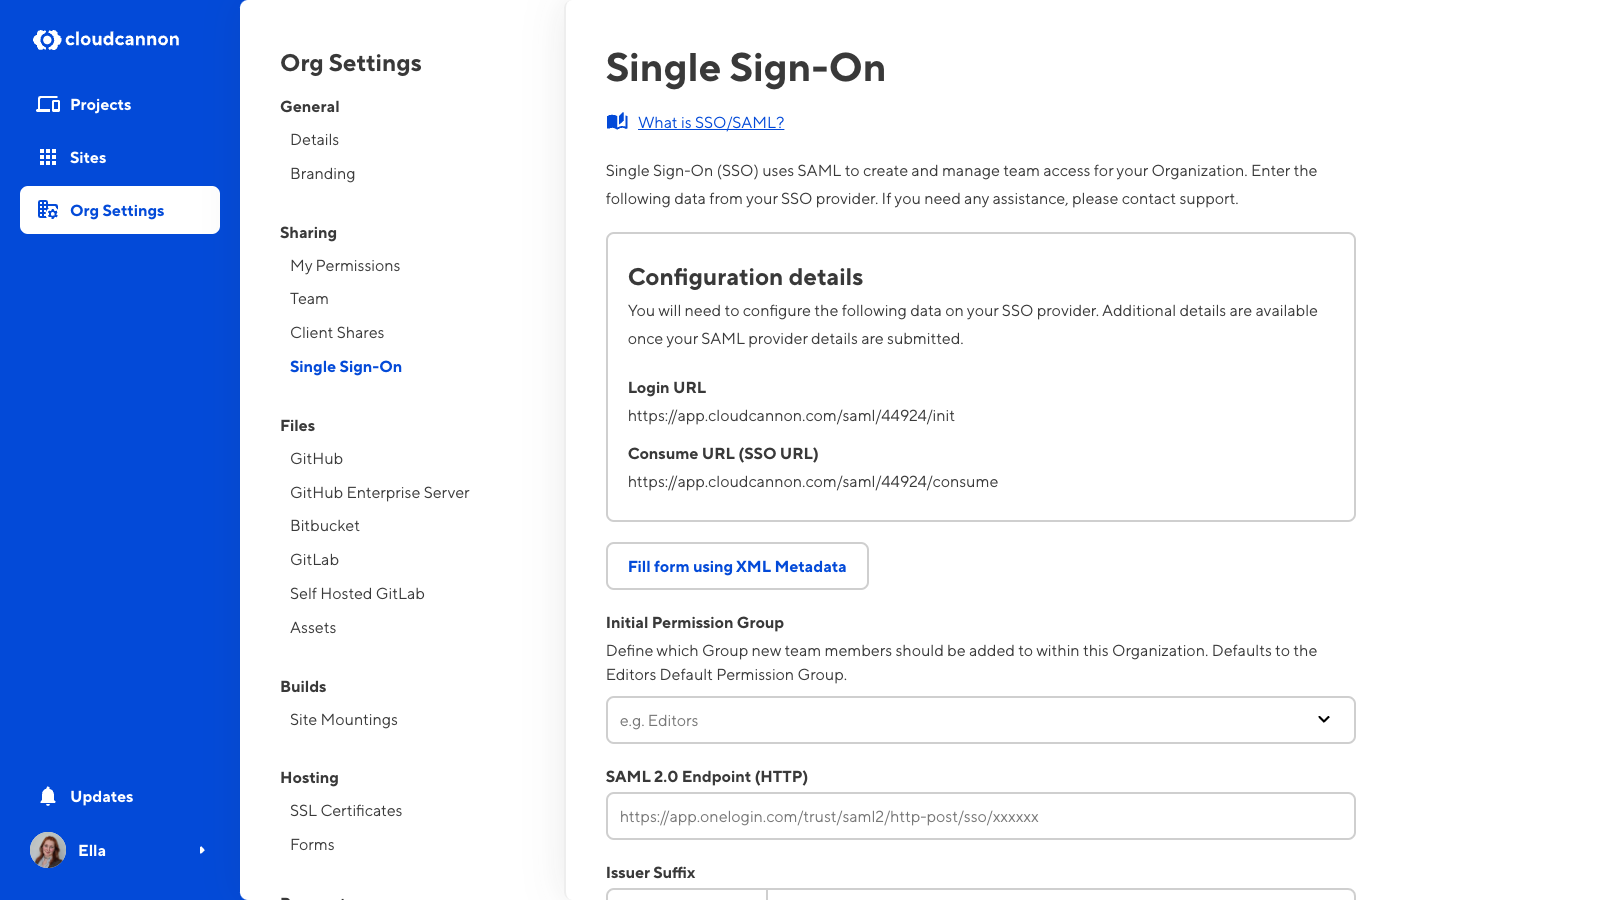 A screenshot of the Single Sign-On pages shows the configuration details for initial set up of your Identity Provider.